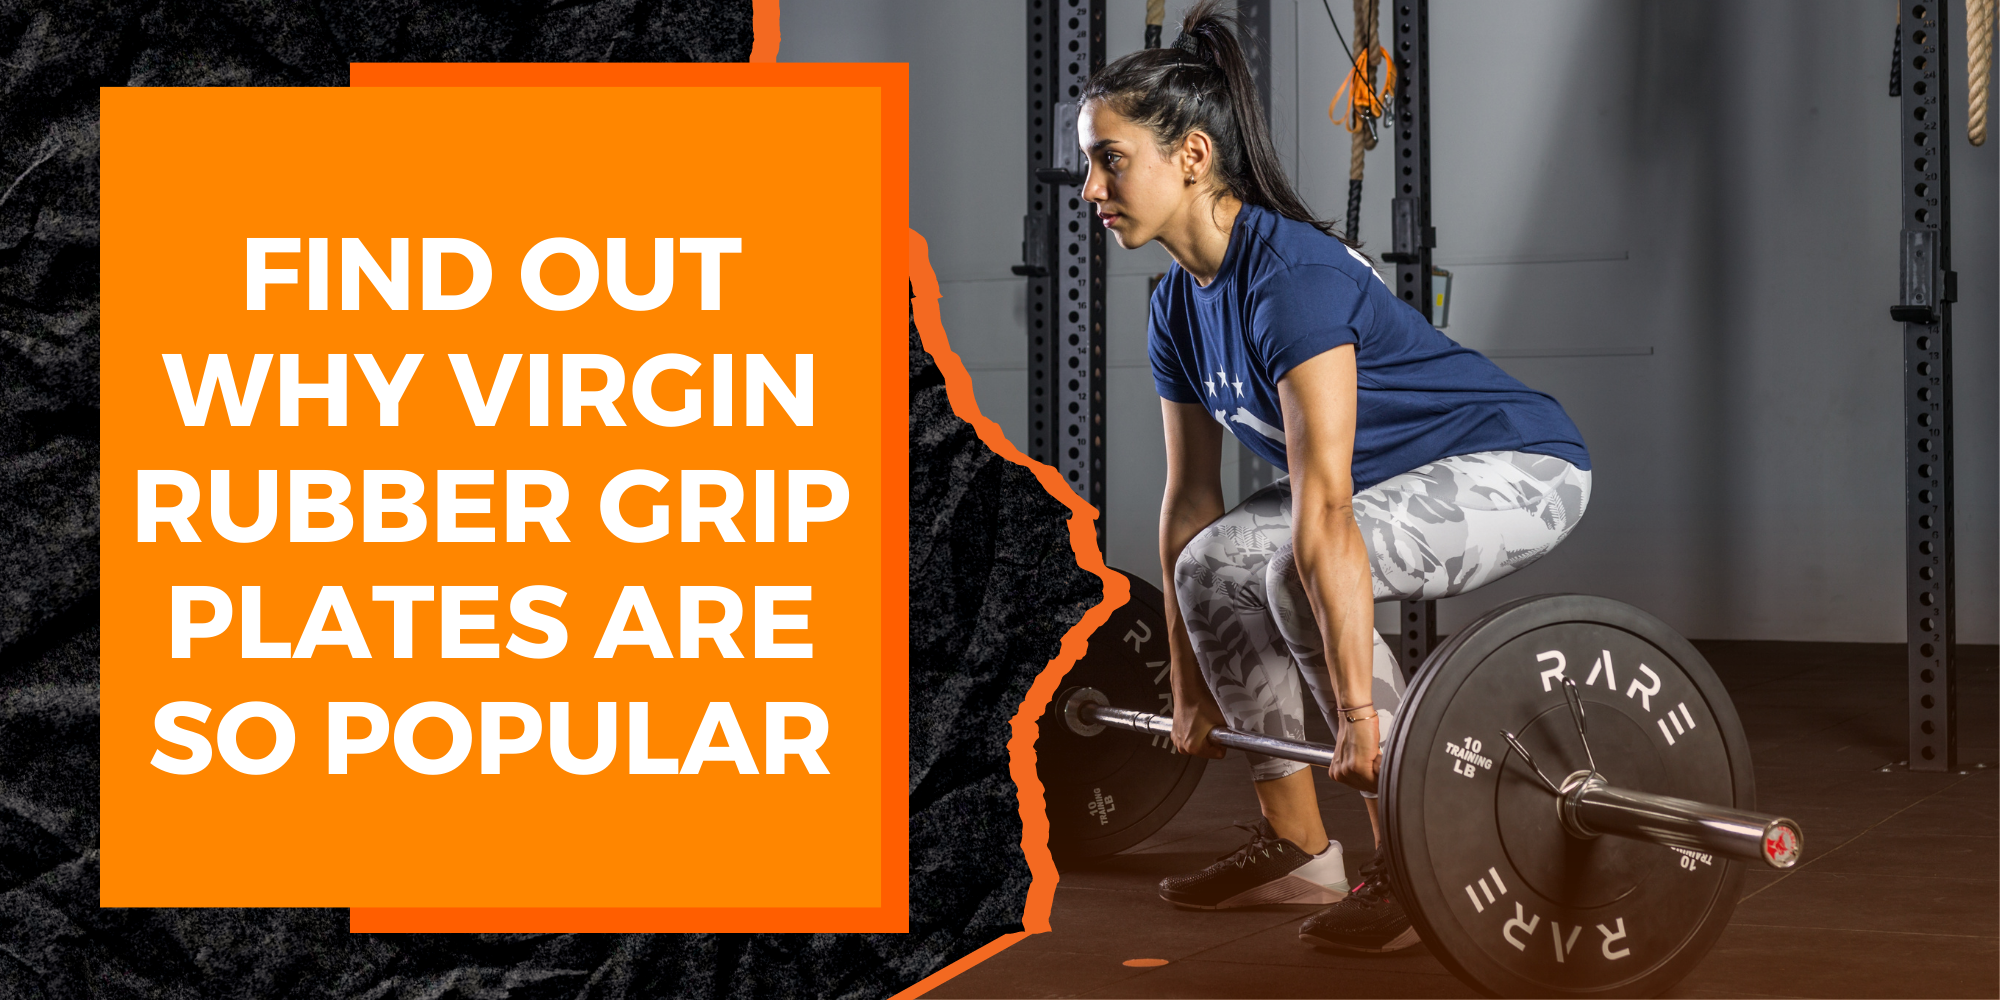 Find Out Why Virgin Rubber Grip Plates Are So Popular